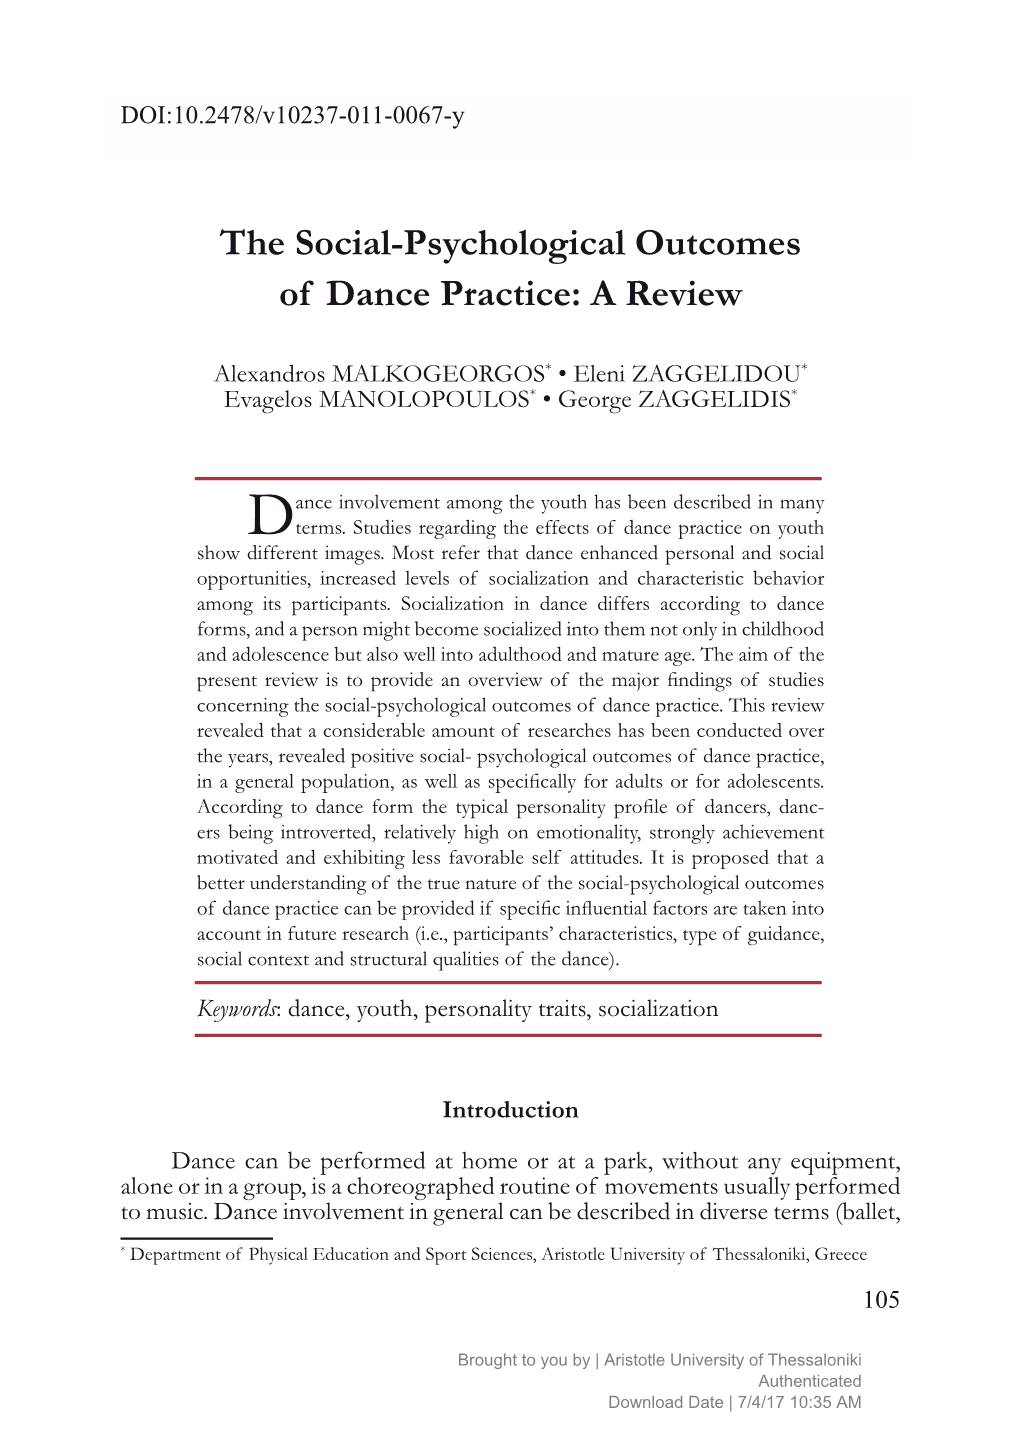 The Social-Psychological Outcomes of Dance Practice: a Review